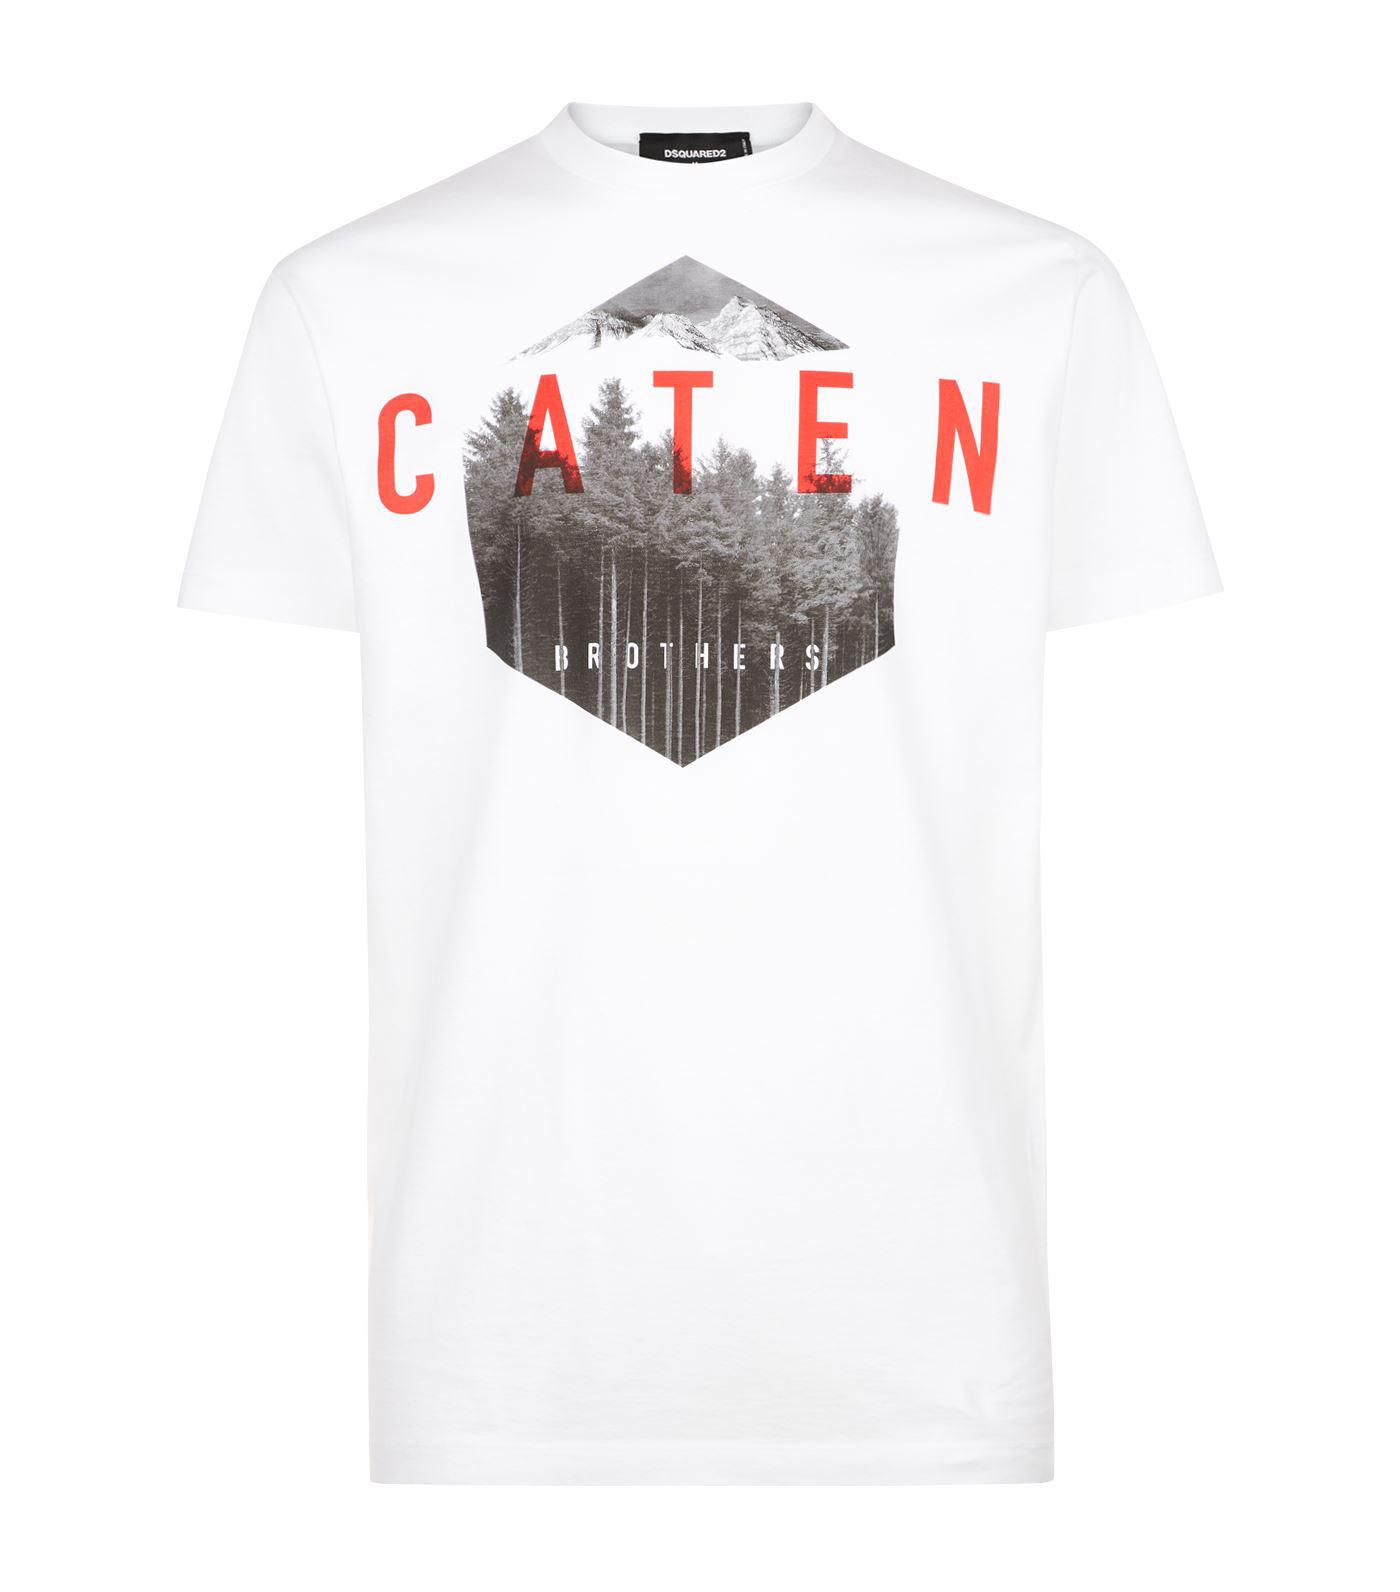 DSquared² Cotton Caten Brothers T-shirt 